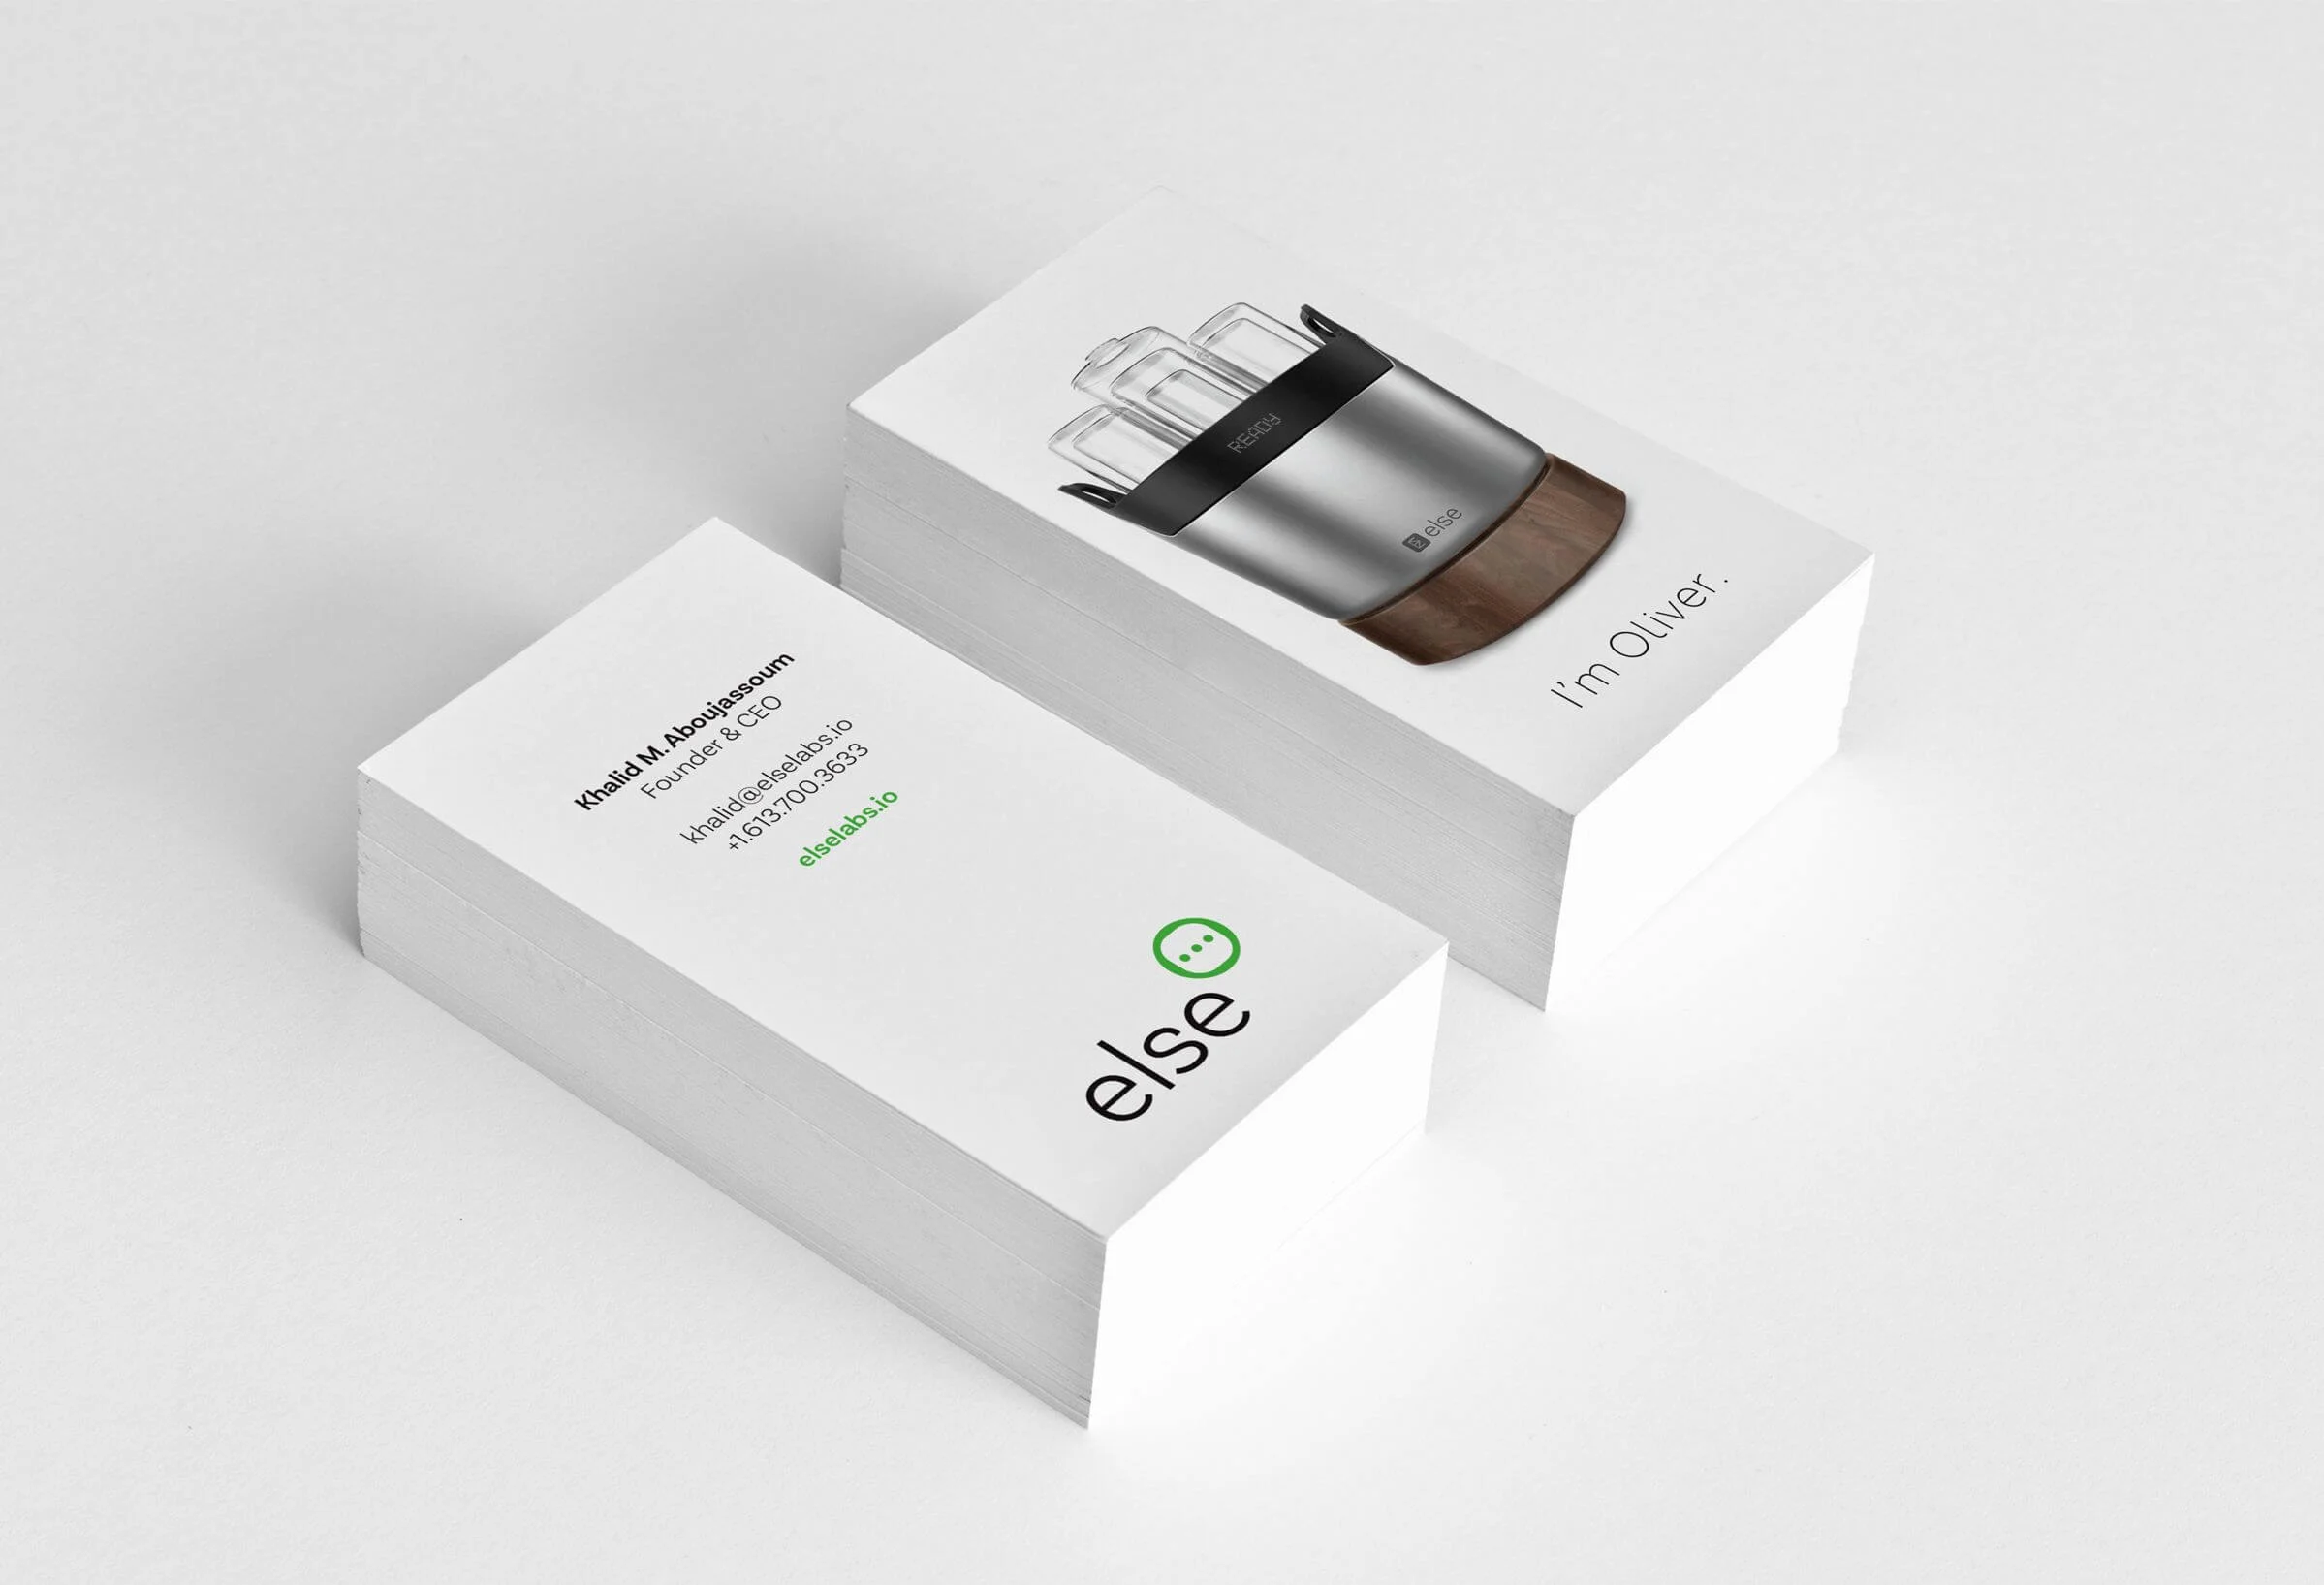 Else Labs business cards version 1 by Ottawa graphic designer idApostle